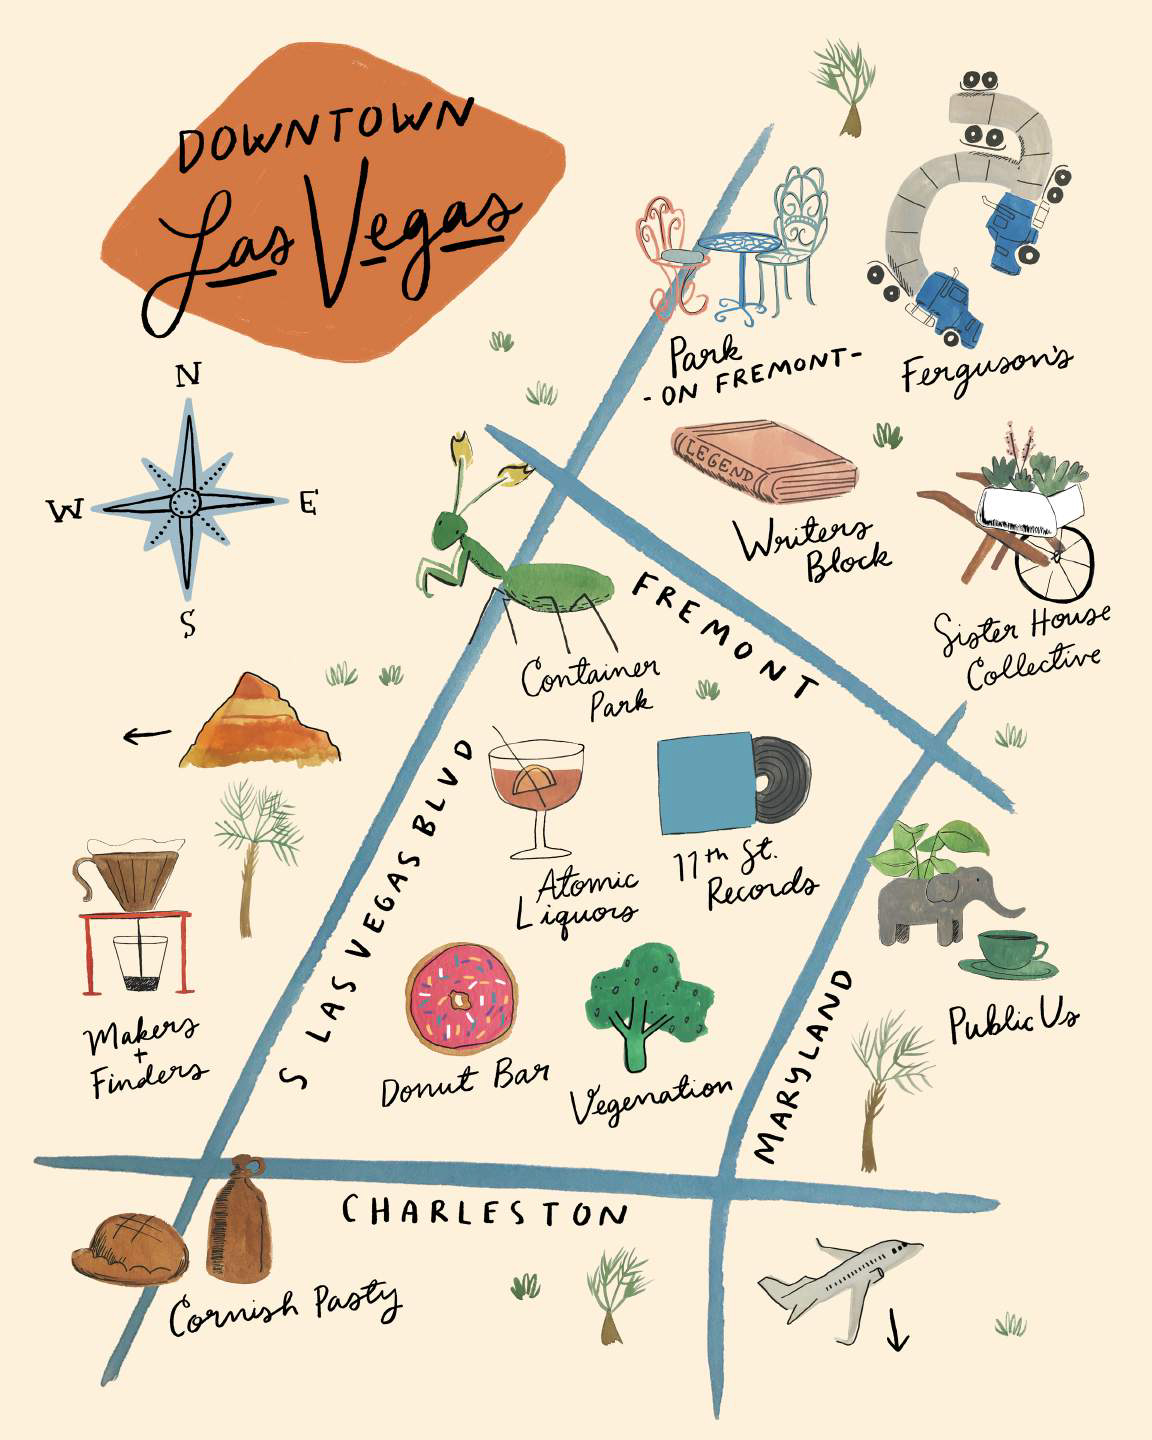 Illustrated Downtown Las Vegas map